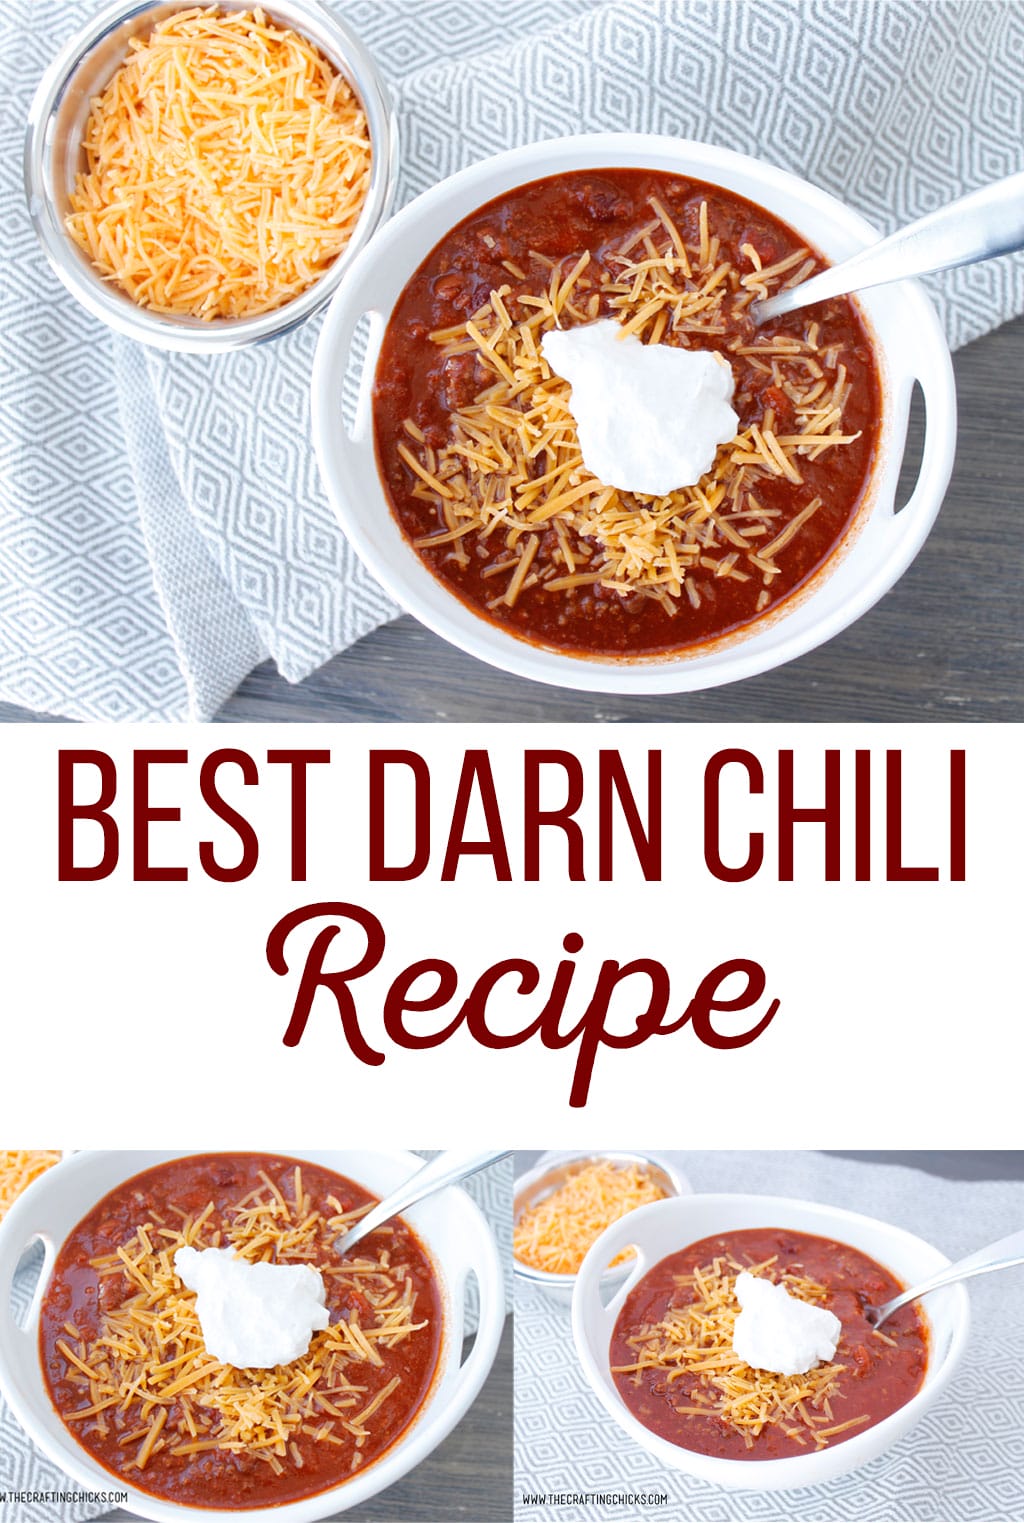 If you are looking for the Best Darn Chili Recipe, here it is. This chili has the perfect combination of spices, beans, and meat. It's darn near perfect chili. #chilirecipe #darngoodchili